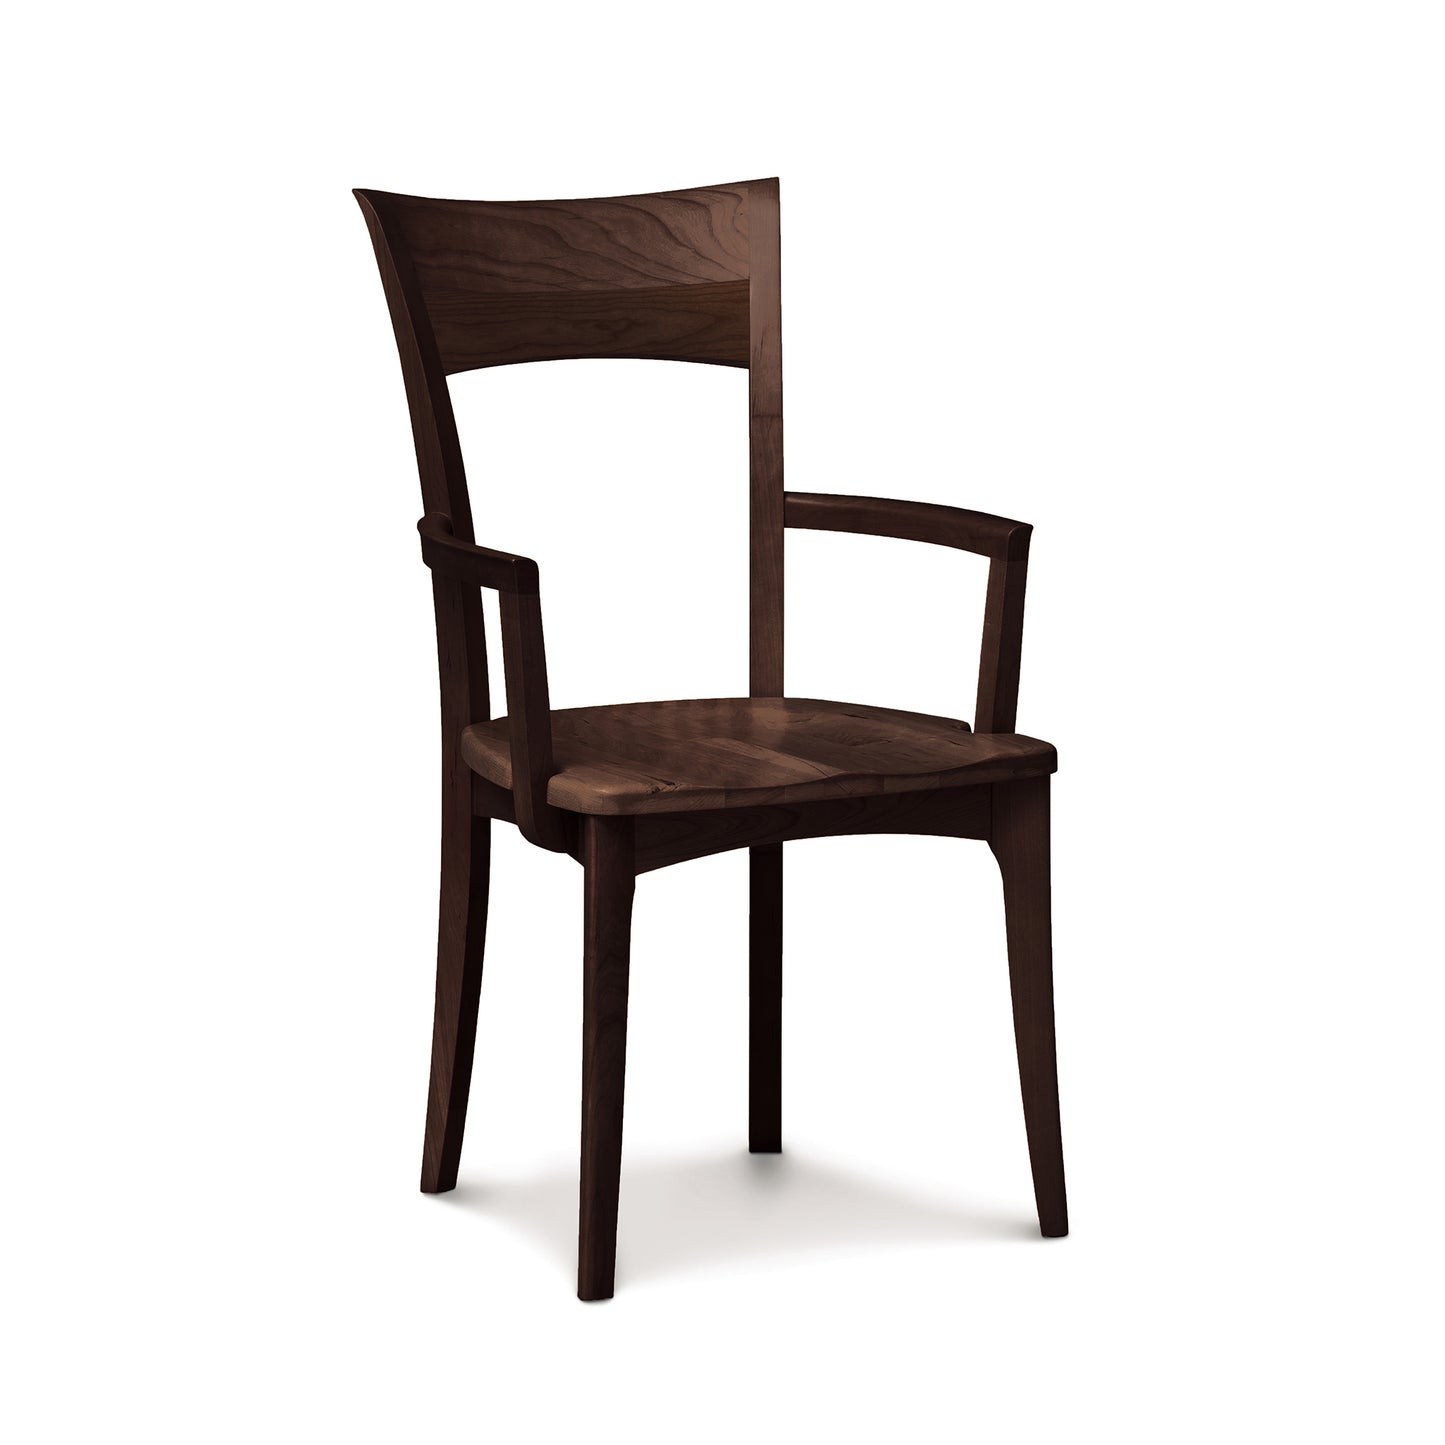 A Copeland Furniture Ingrid Shaker dining chair with armrests, crafted from solid wood and isolated on a white background.